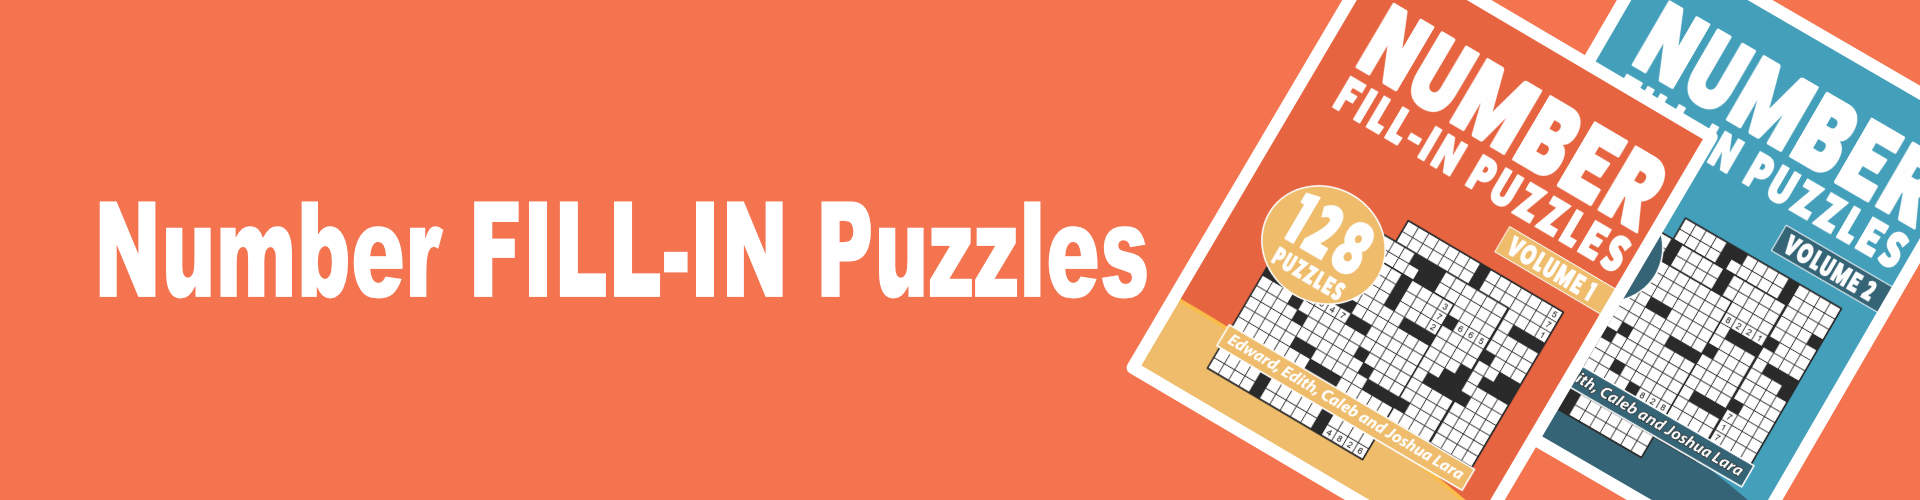 Number FILL-IN Puzzles